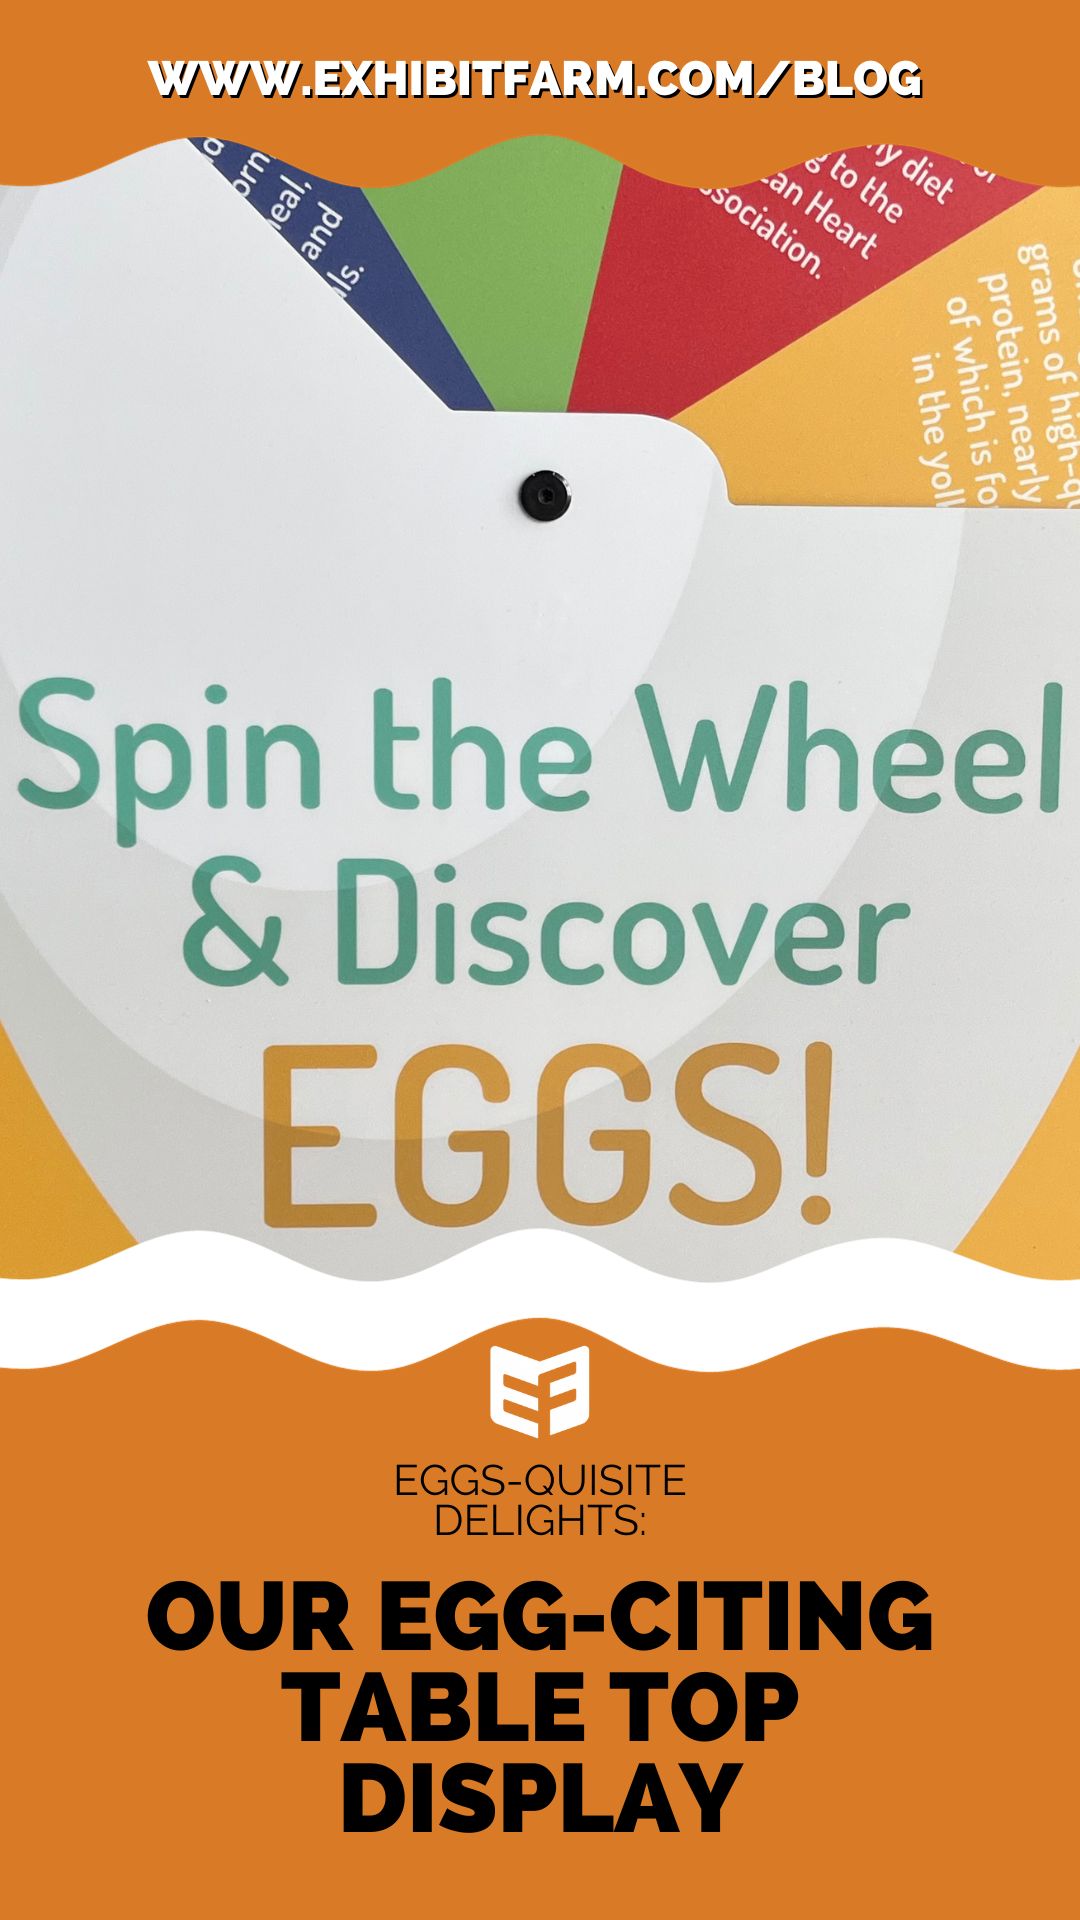 Eggs-quisite Delights: Our Egg-Citing Table Top Display - Exhibit Farm: The  Leader in Agricultural Exhibits and Displays